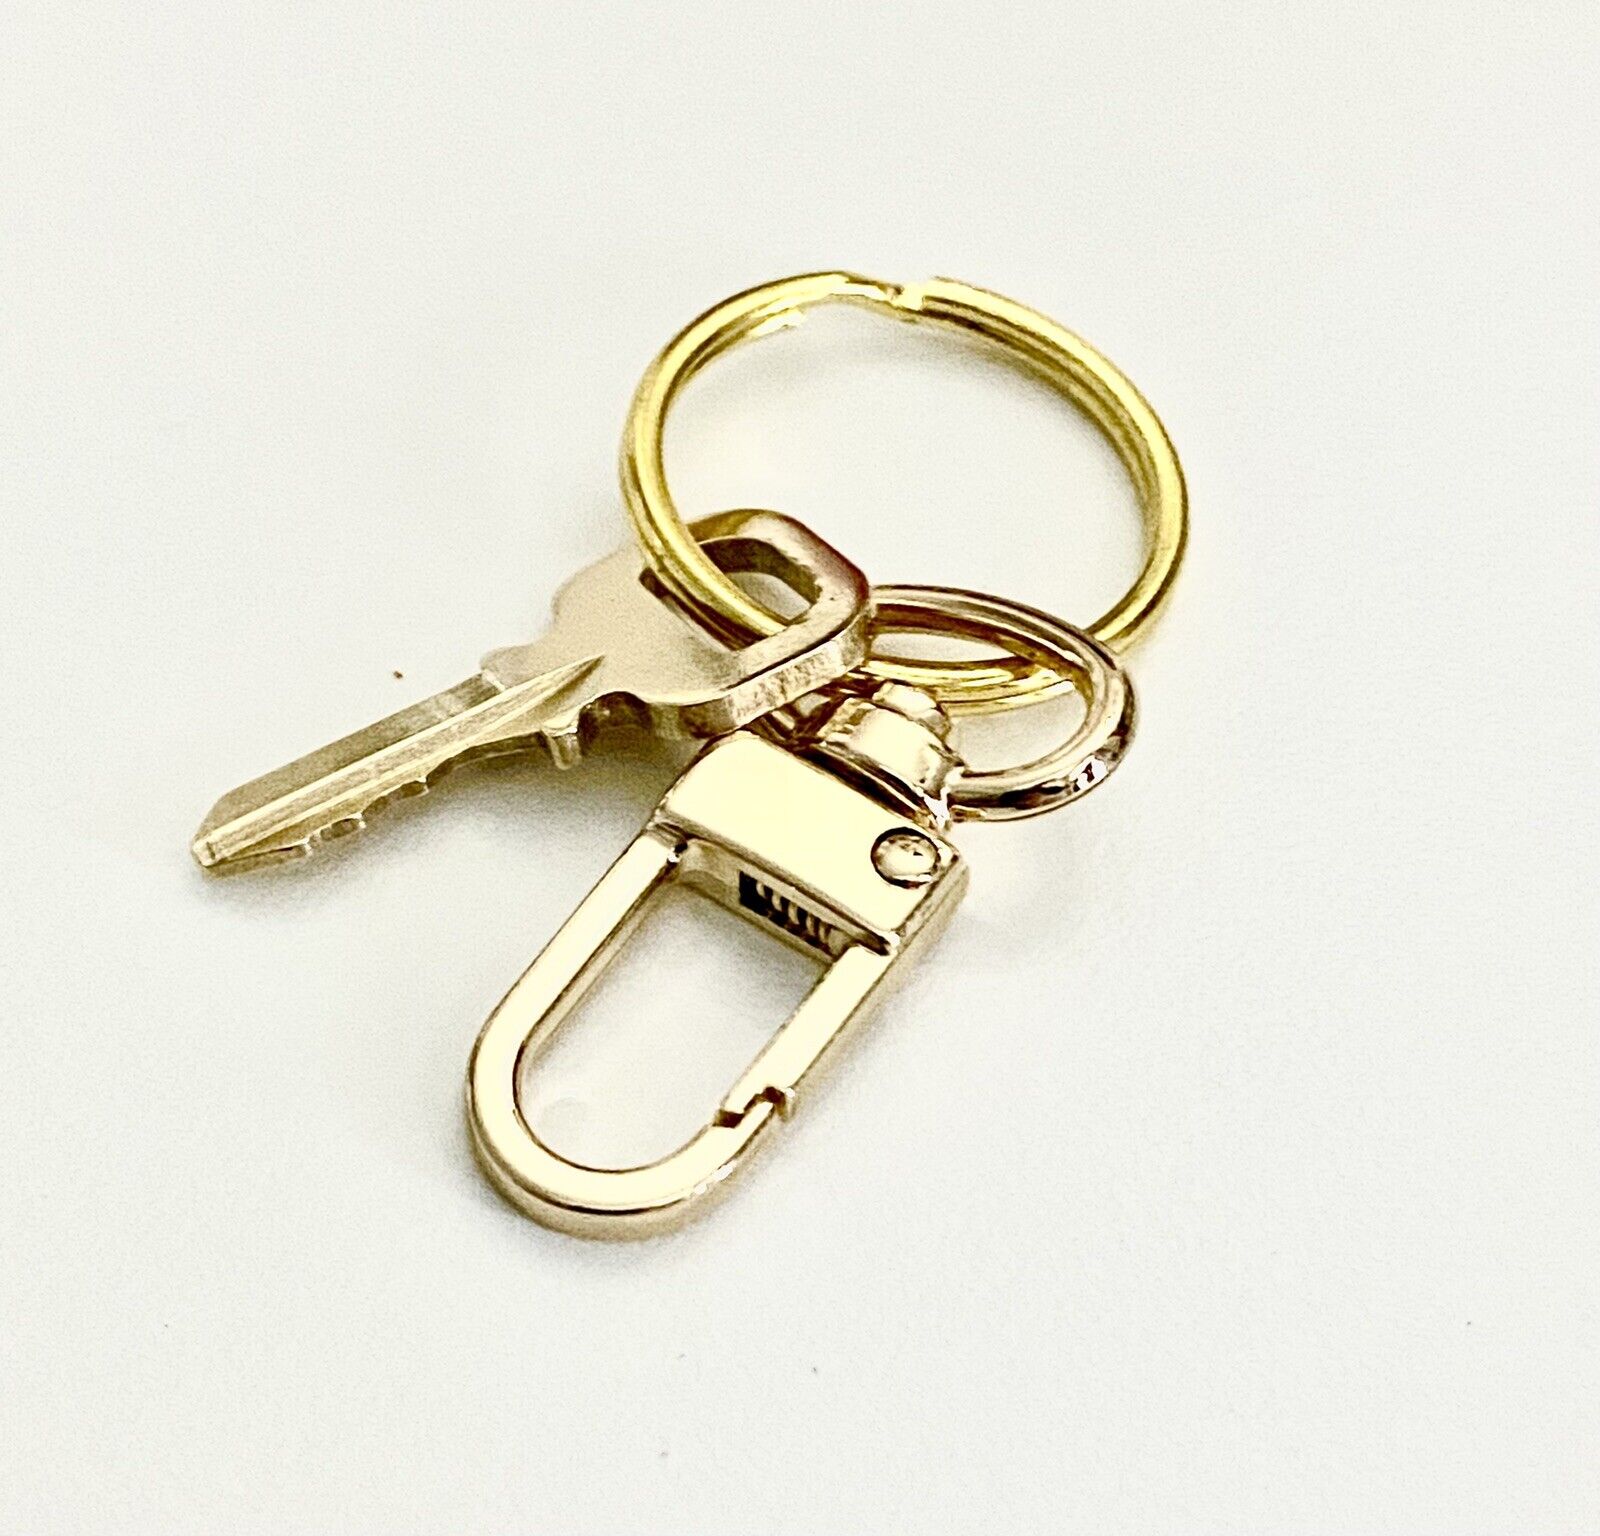 Authentic Louis Vuitton Gold Brass Lock and Key Set 339 